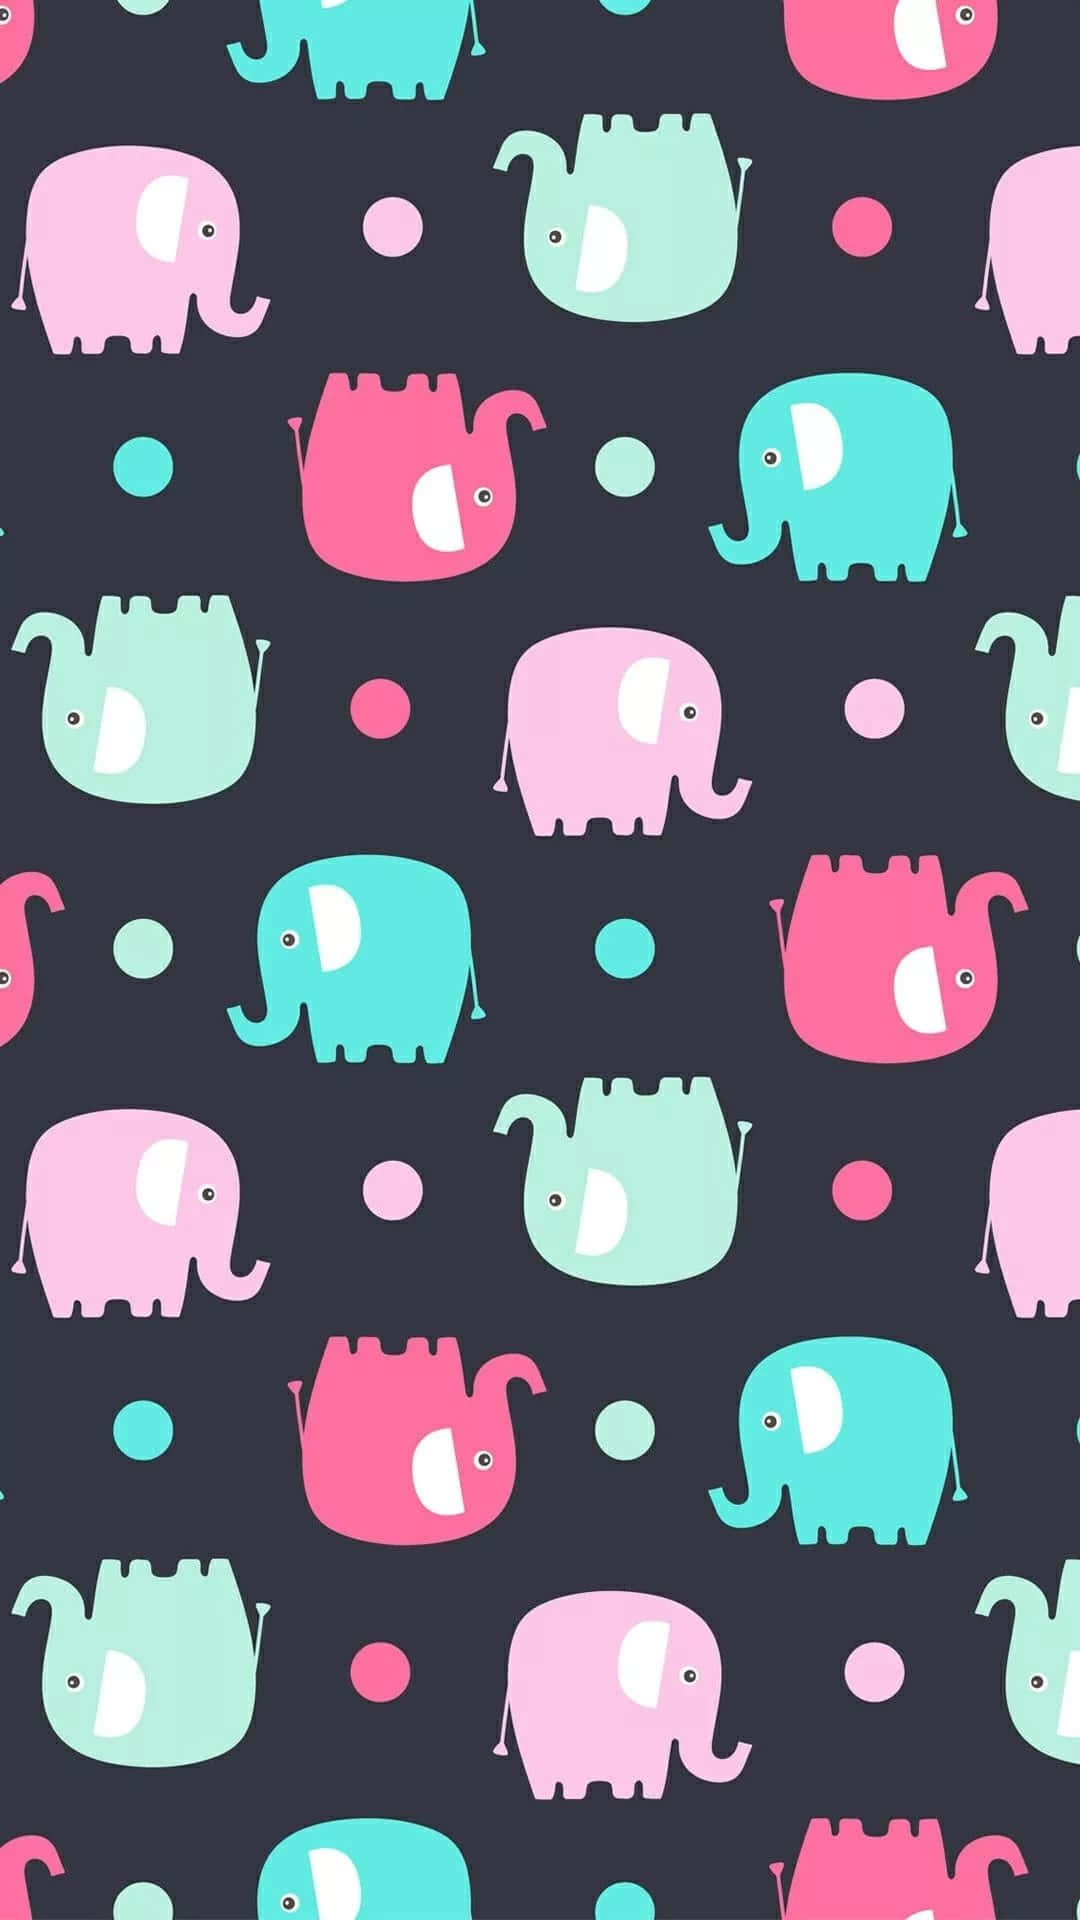 A modern and stylish iPhone featuring adorable illustrations Wallpaper